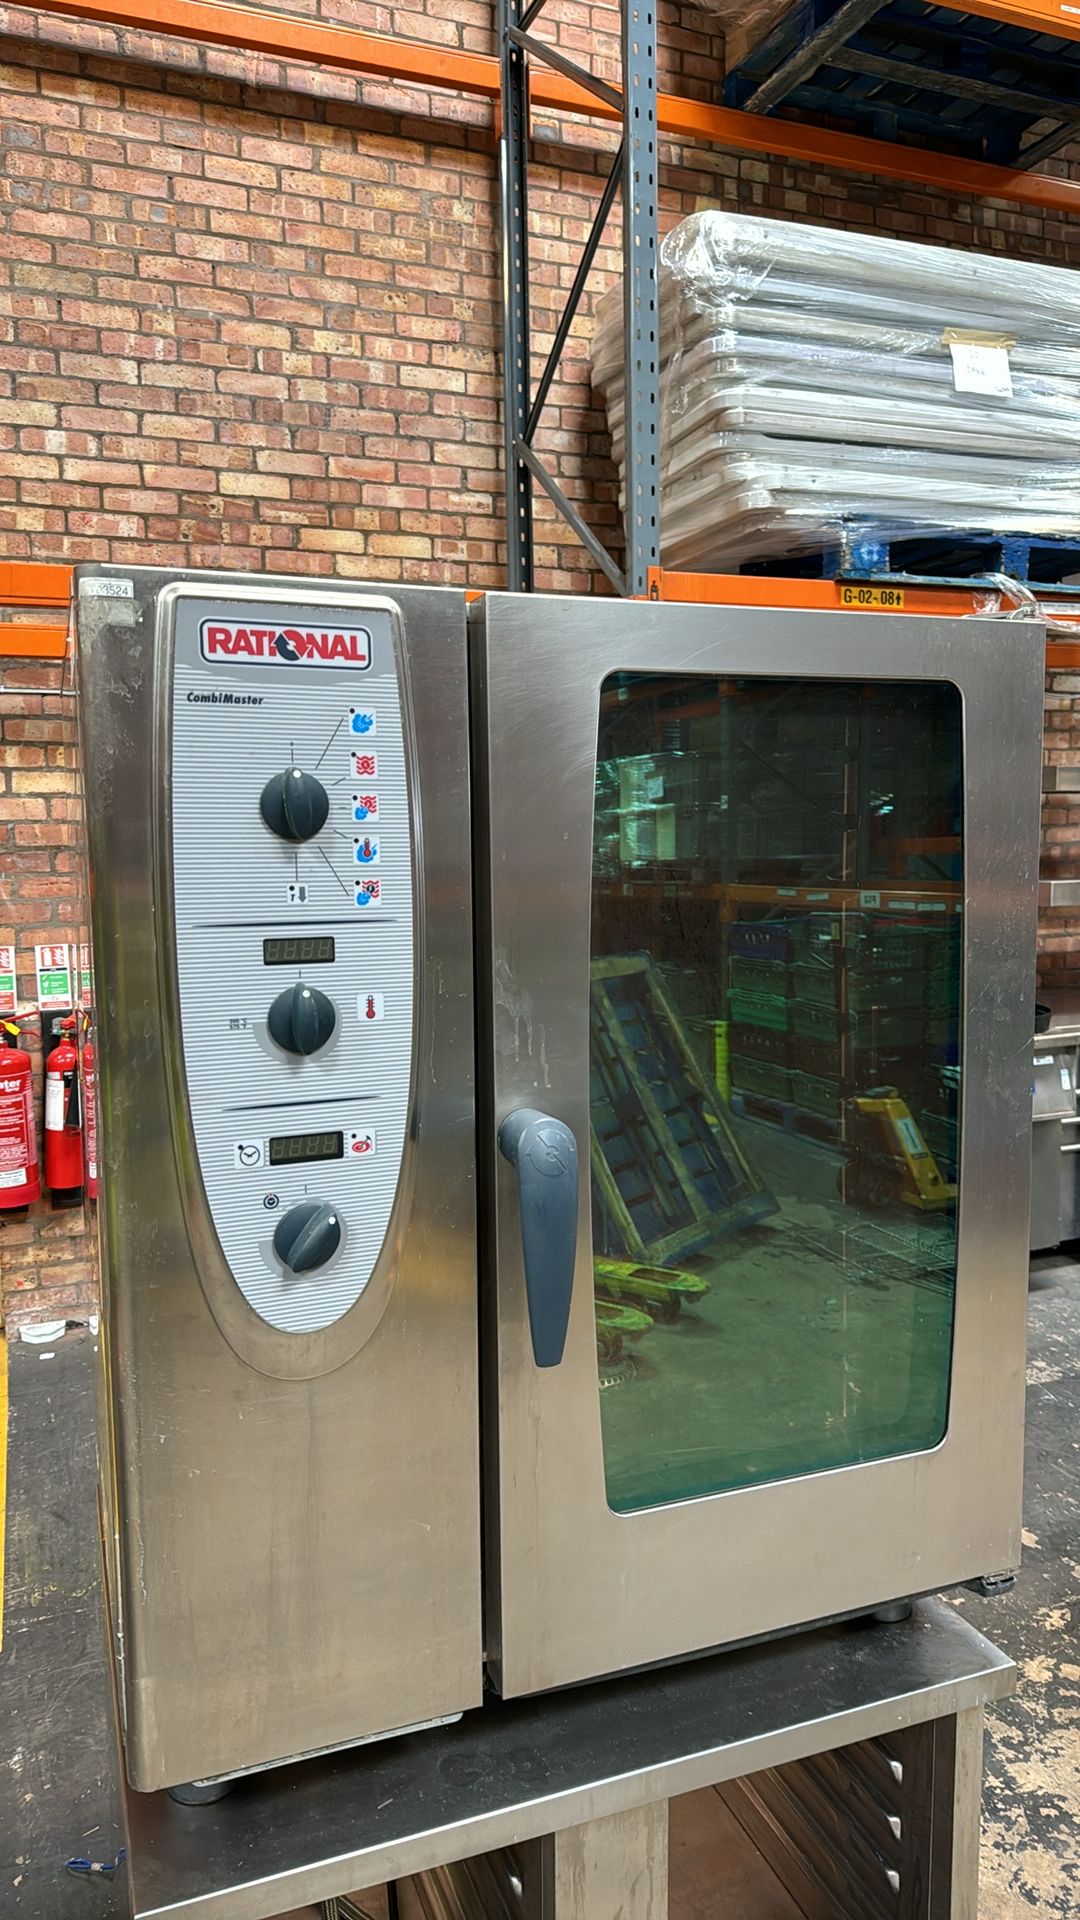 RATIONAL - CombiMaster Oven Model CM101G - Image 8 of 8